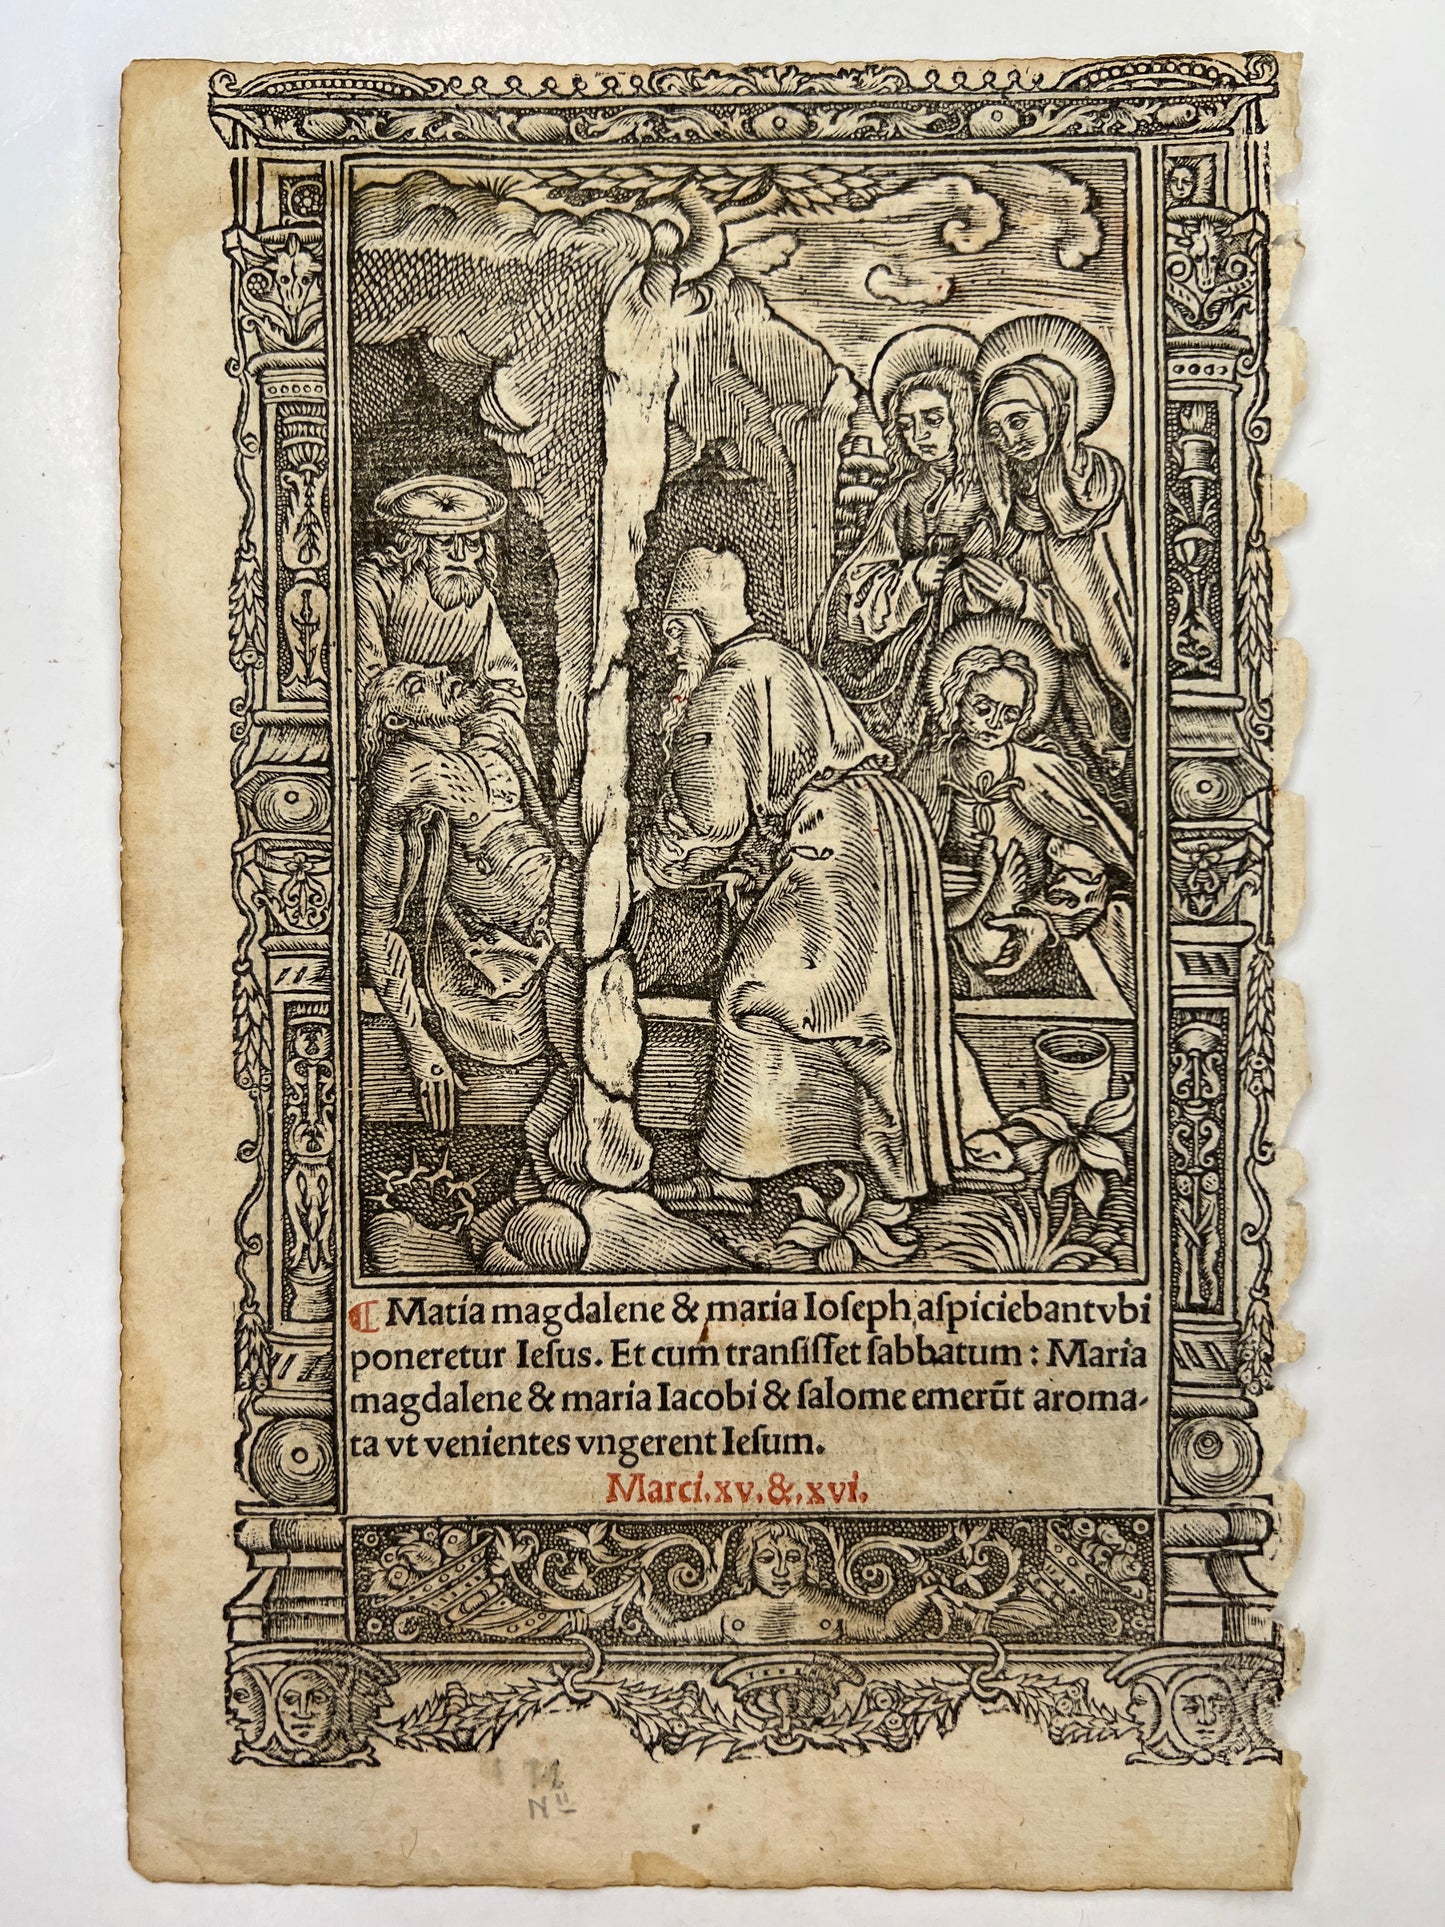 c1500s Leaf from Printed Book of Hours with Metalcuts - Burial of Jesus